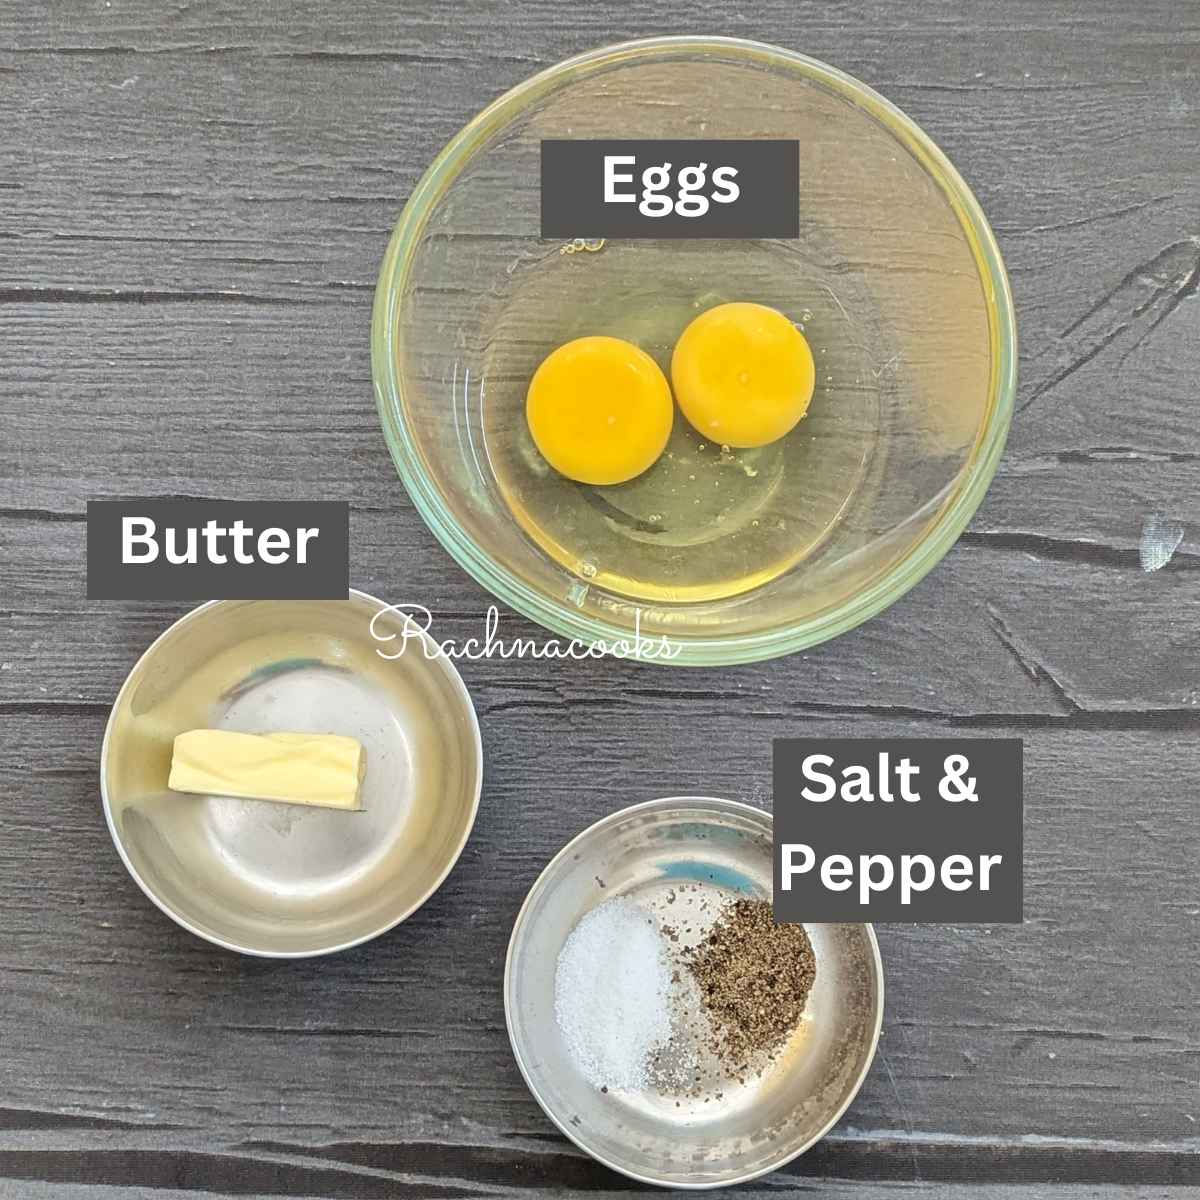 Ingredients for making scrambled eggs in air fryer showing cracked eggs, butter and salt and pepper.